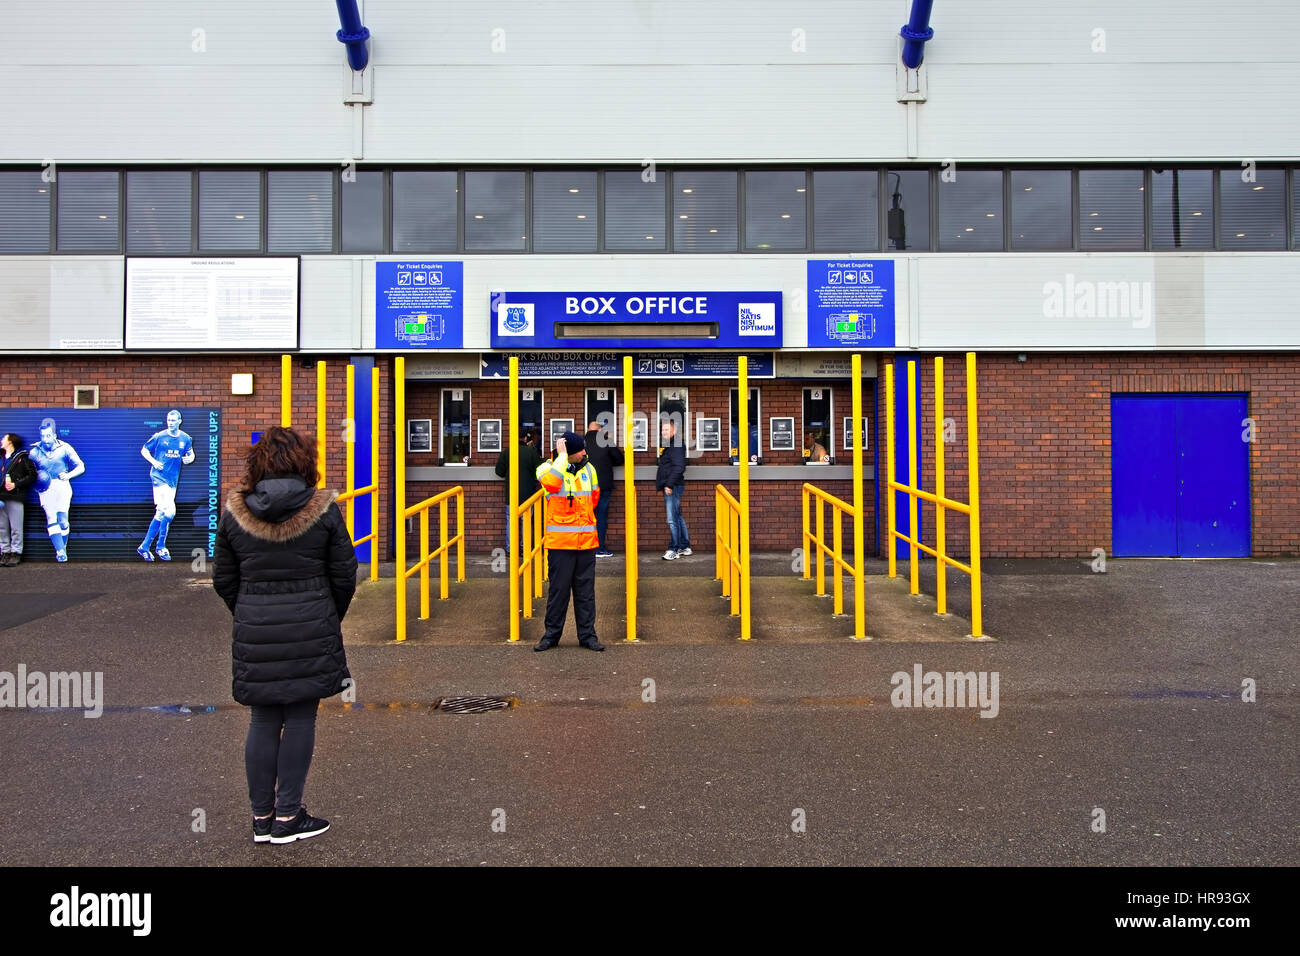 Box office at Goodison Park, home of Everton Football Club, Liverpool UK Stock Photo